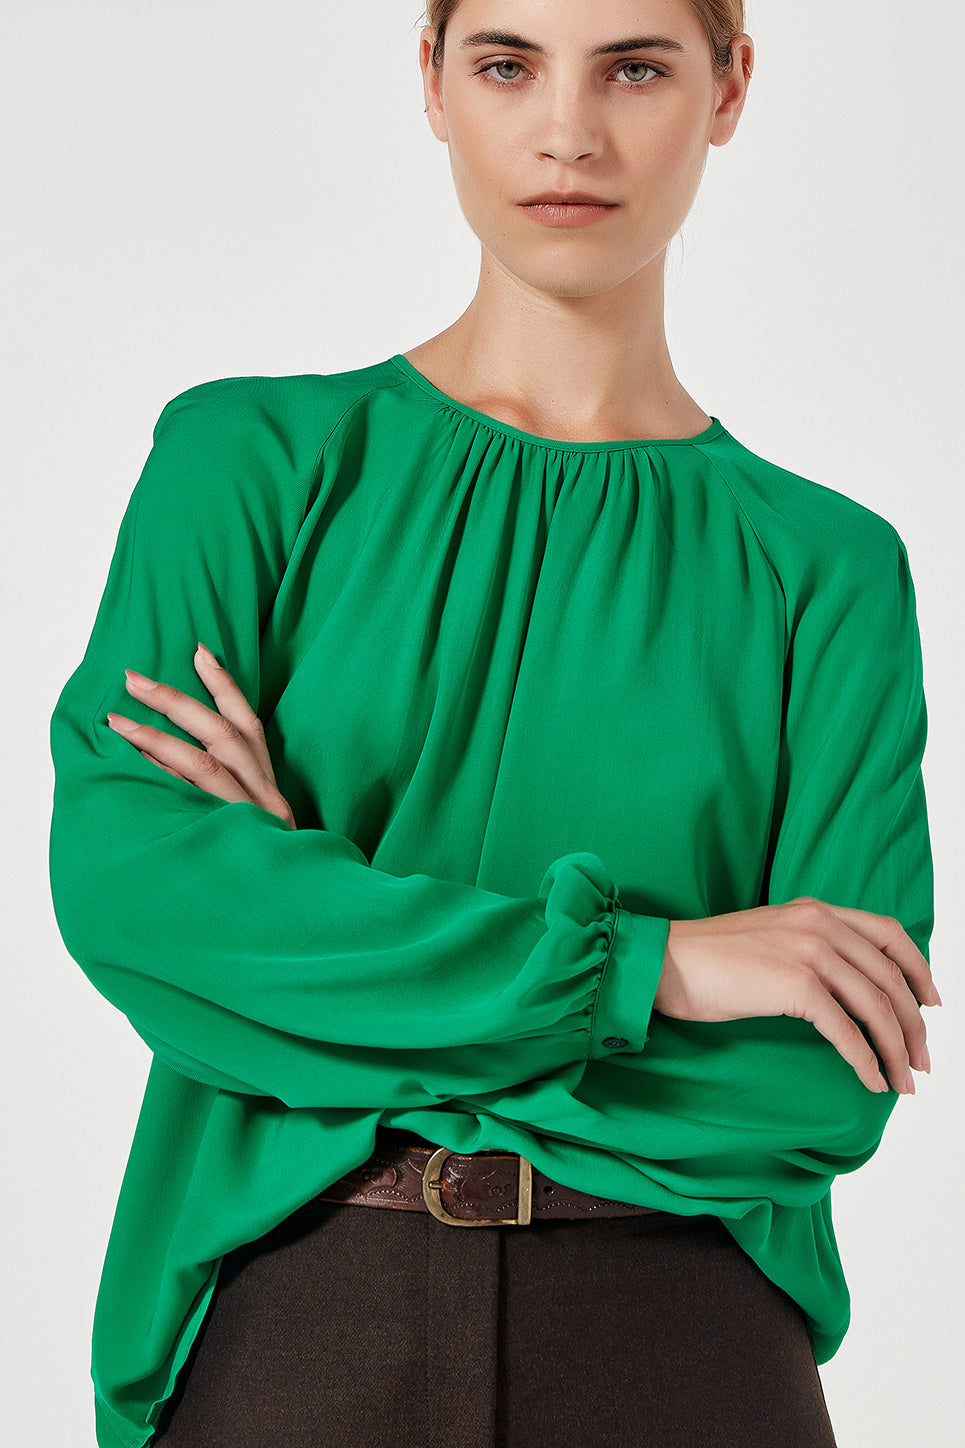 The Lisbon Top in Kelly Green